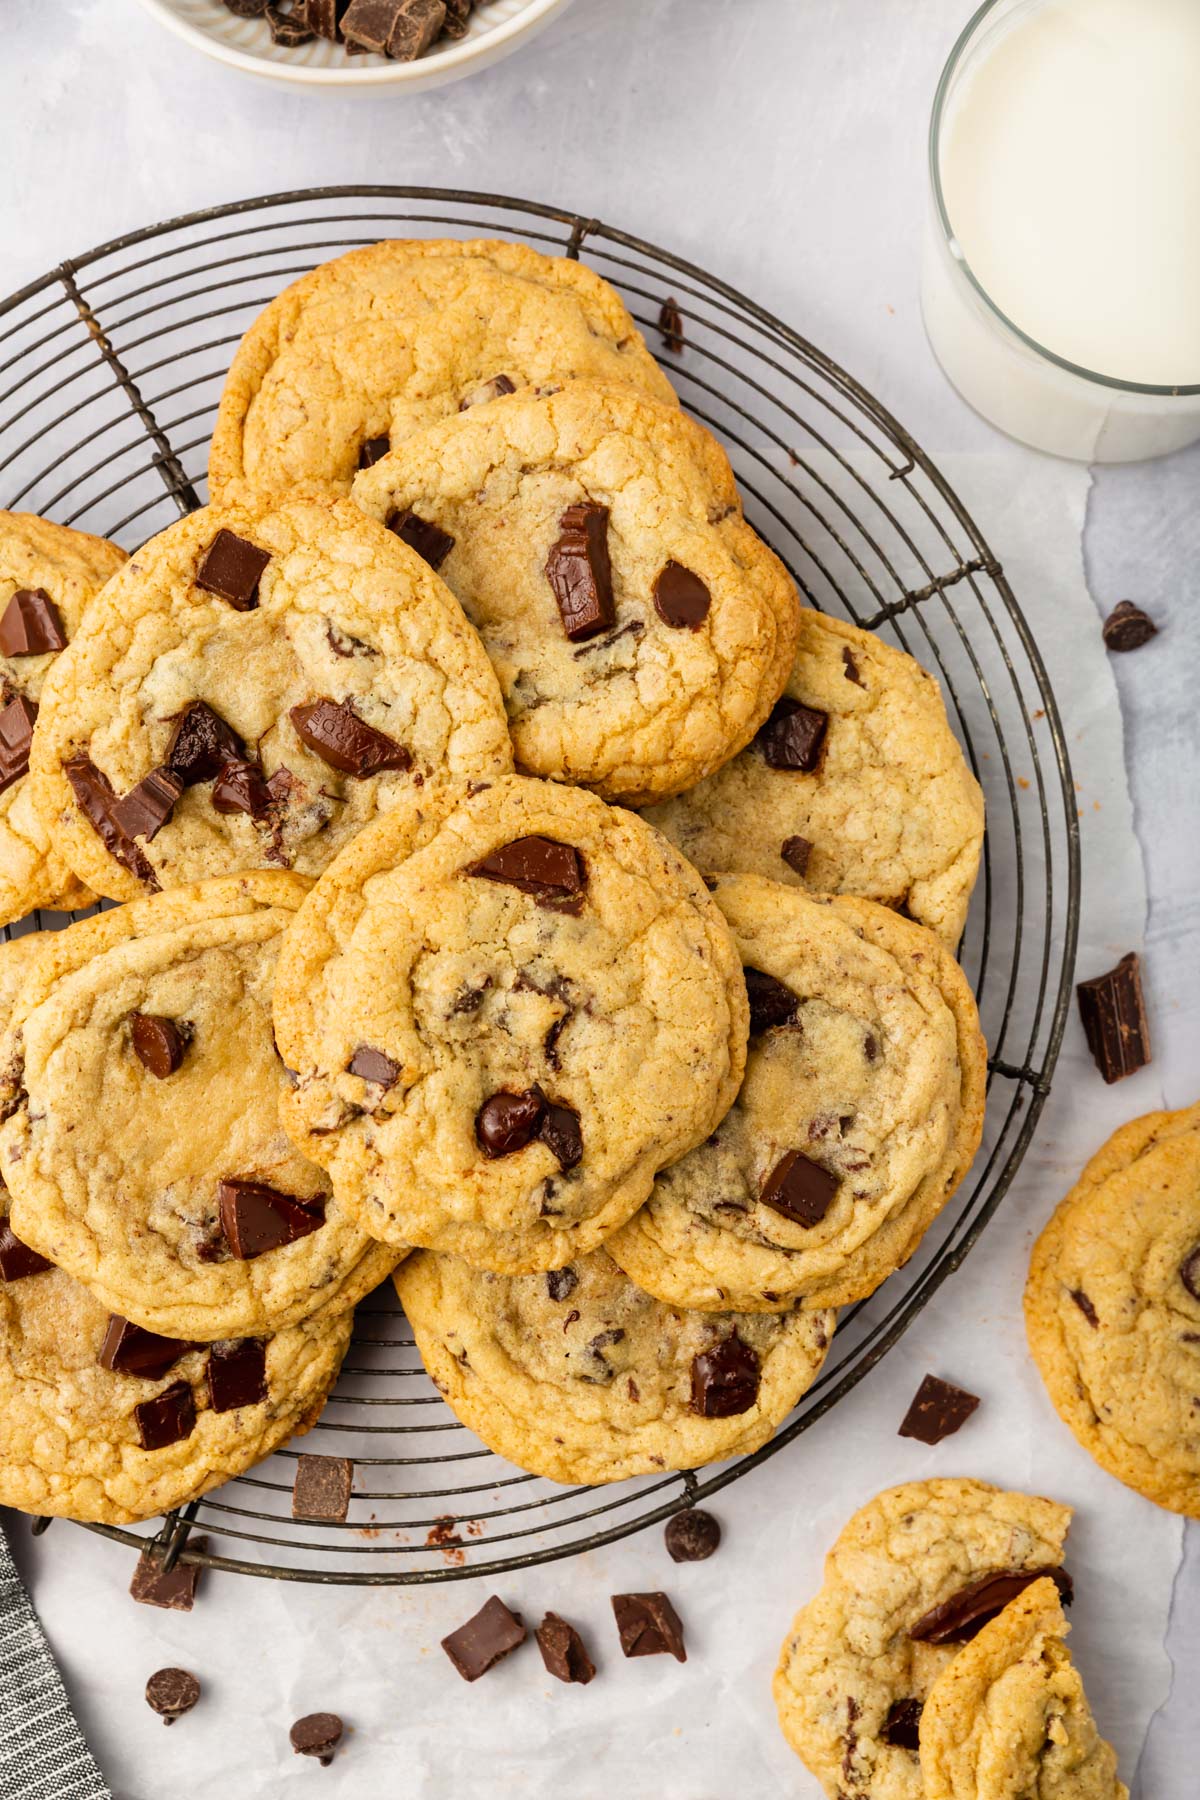 A tray of gluten-free chocolate chip cookies.